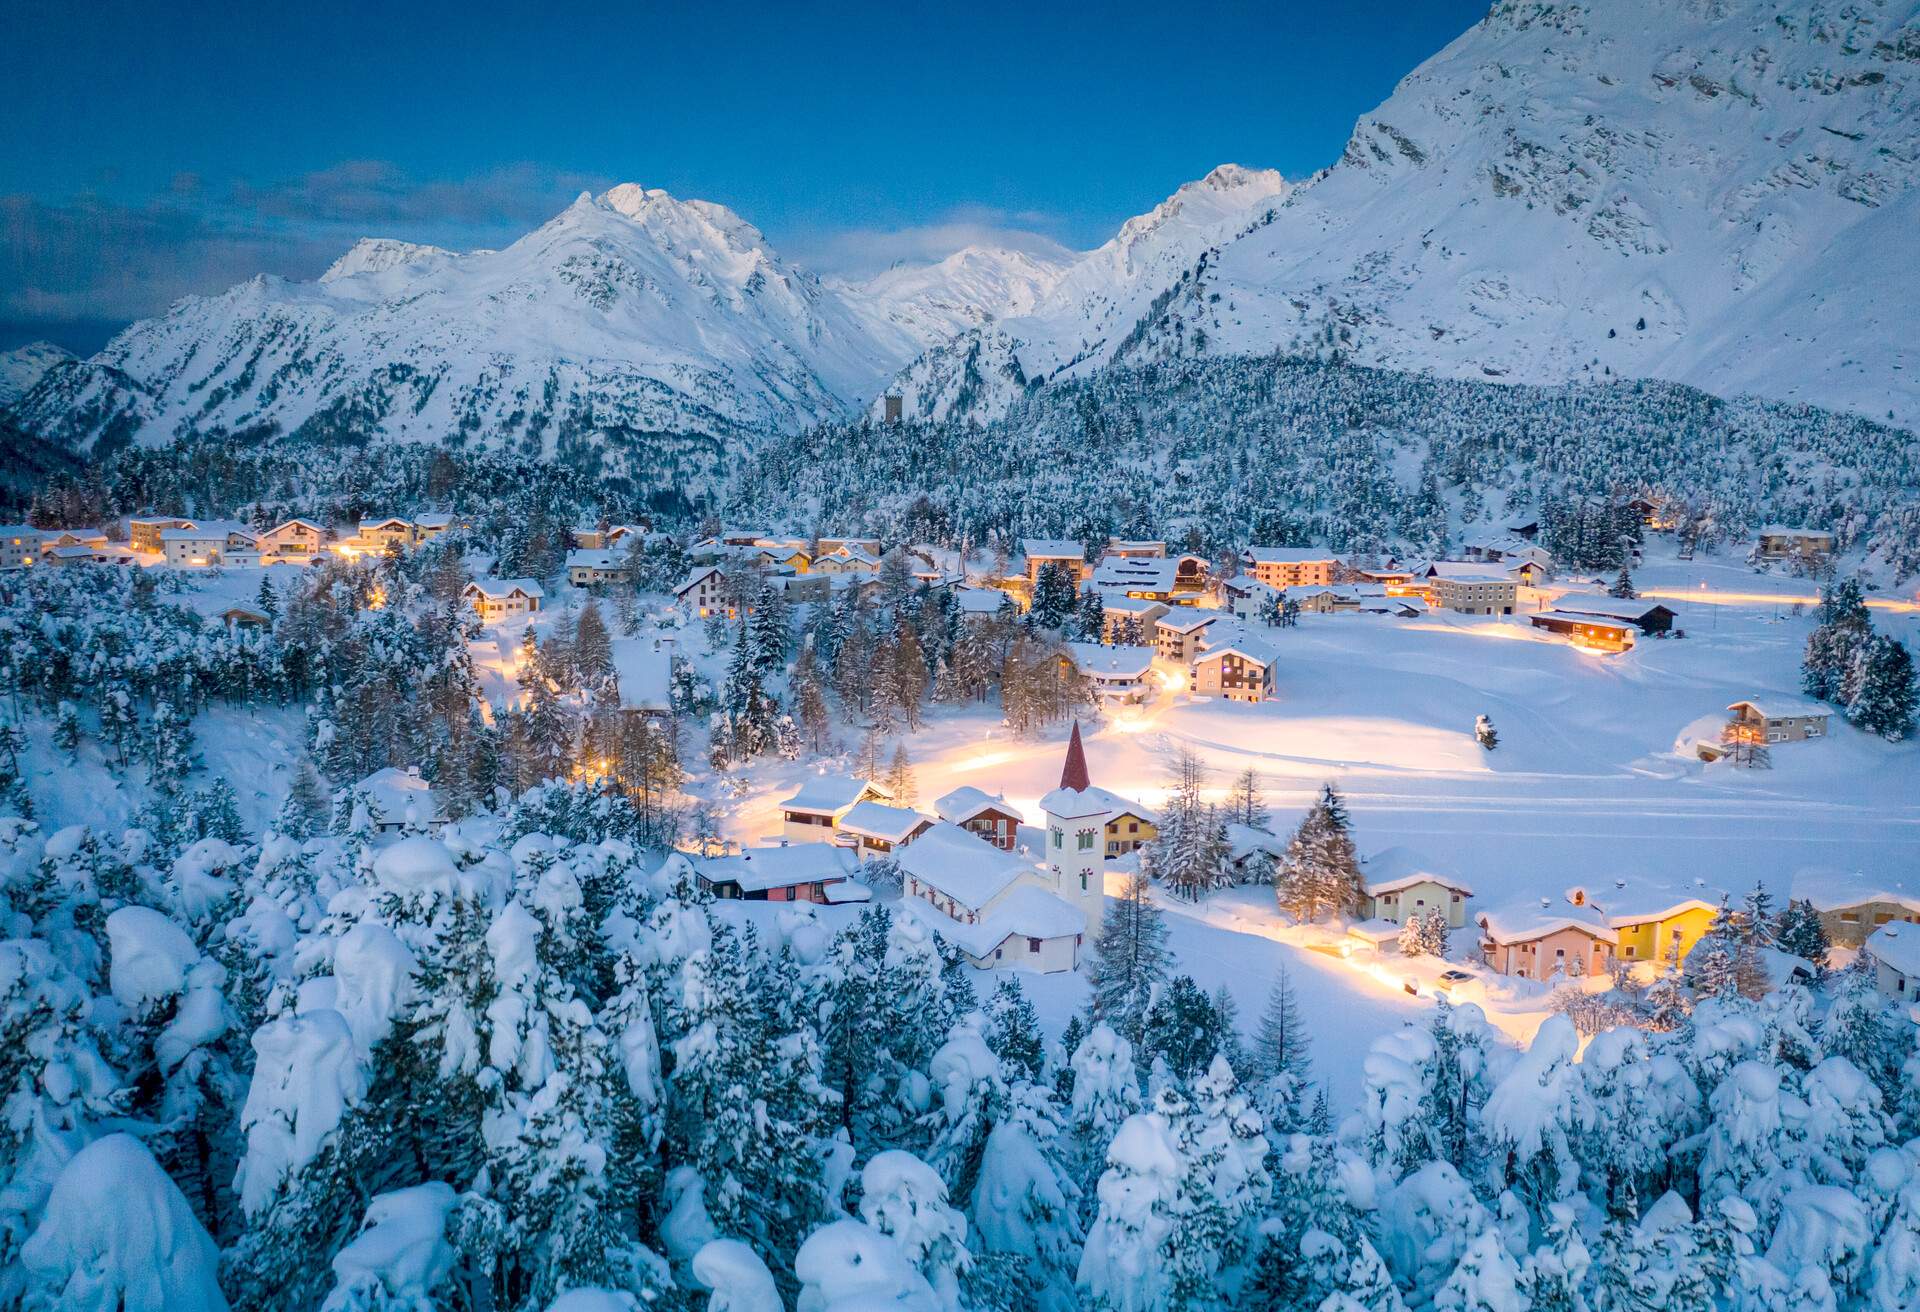 Aerial view of a brightly lit alpine village in the valley of the forested mountains covered in deep snow.